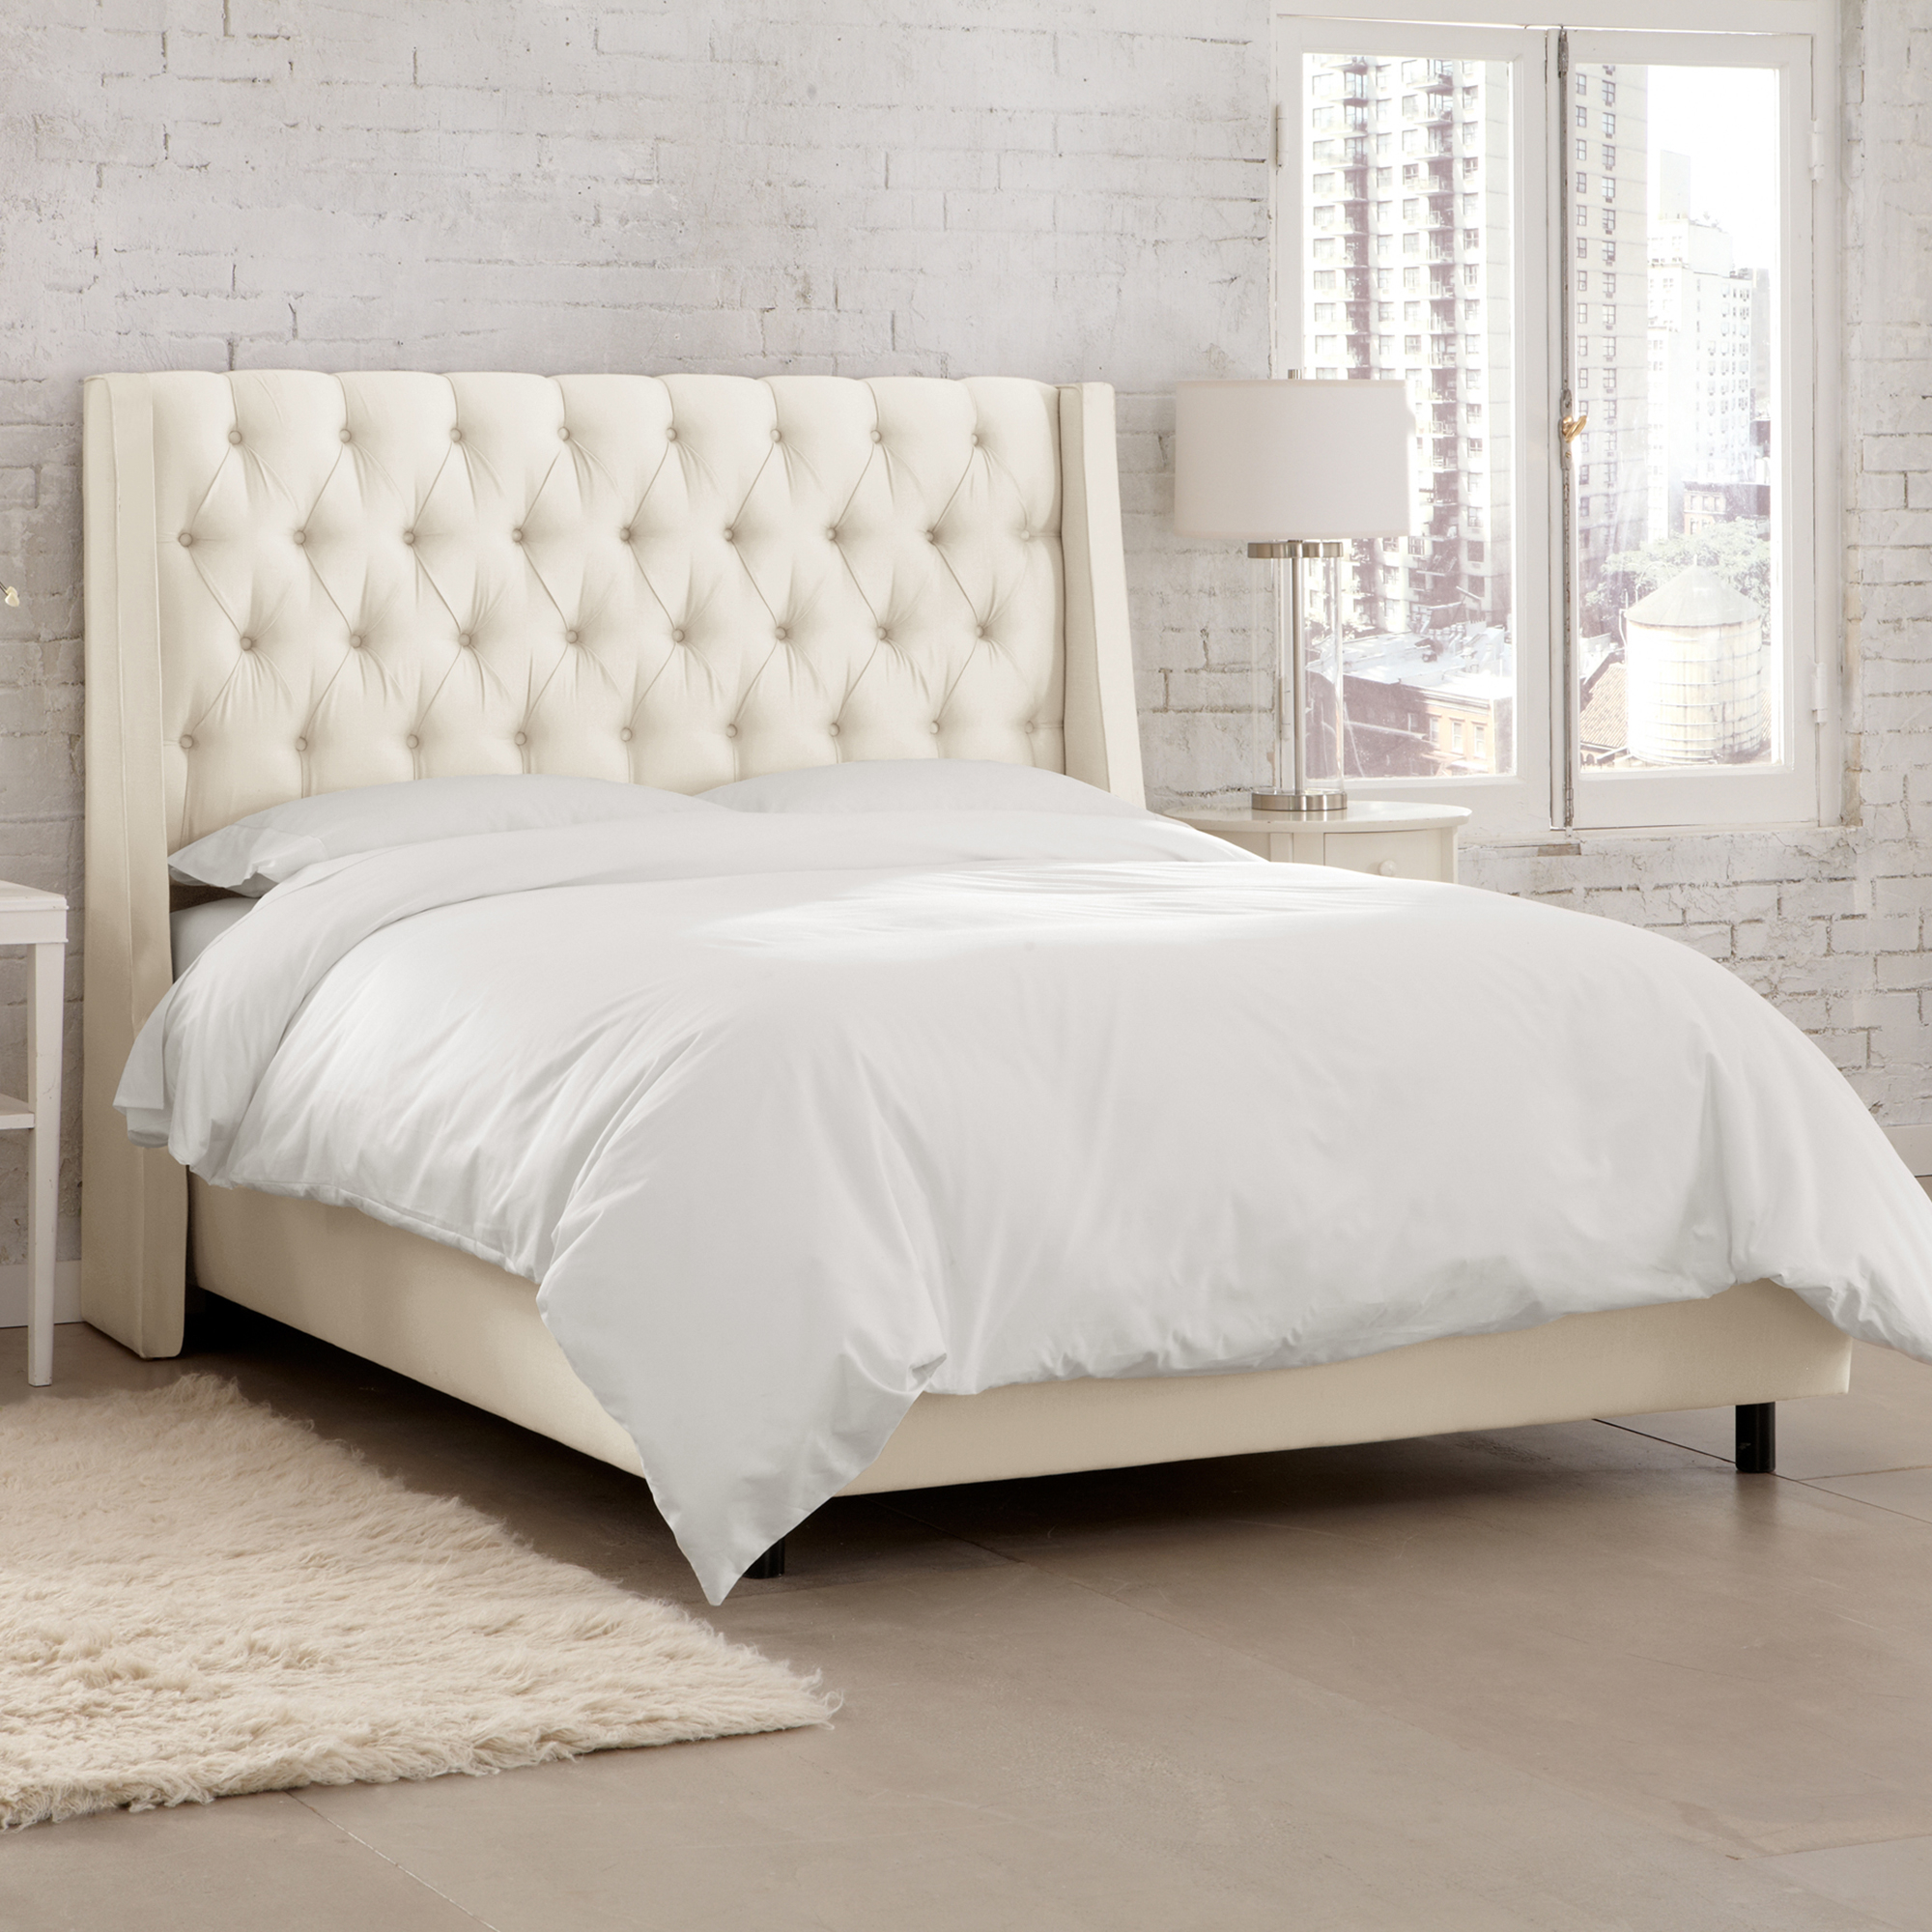 Shantung Tufted Wingback Bed | Gump's